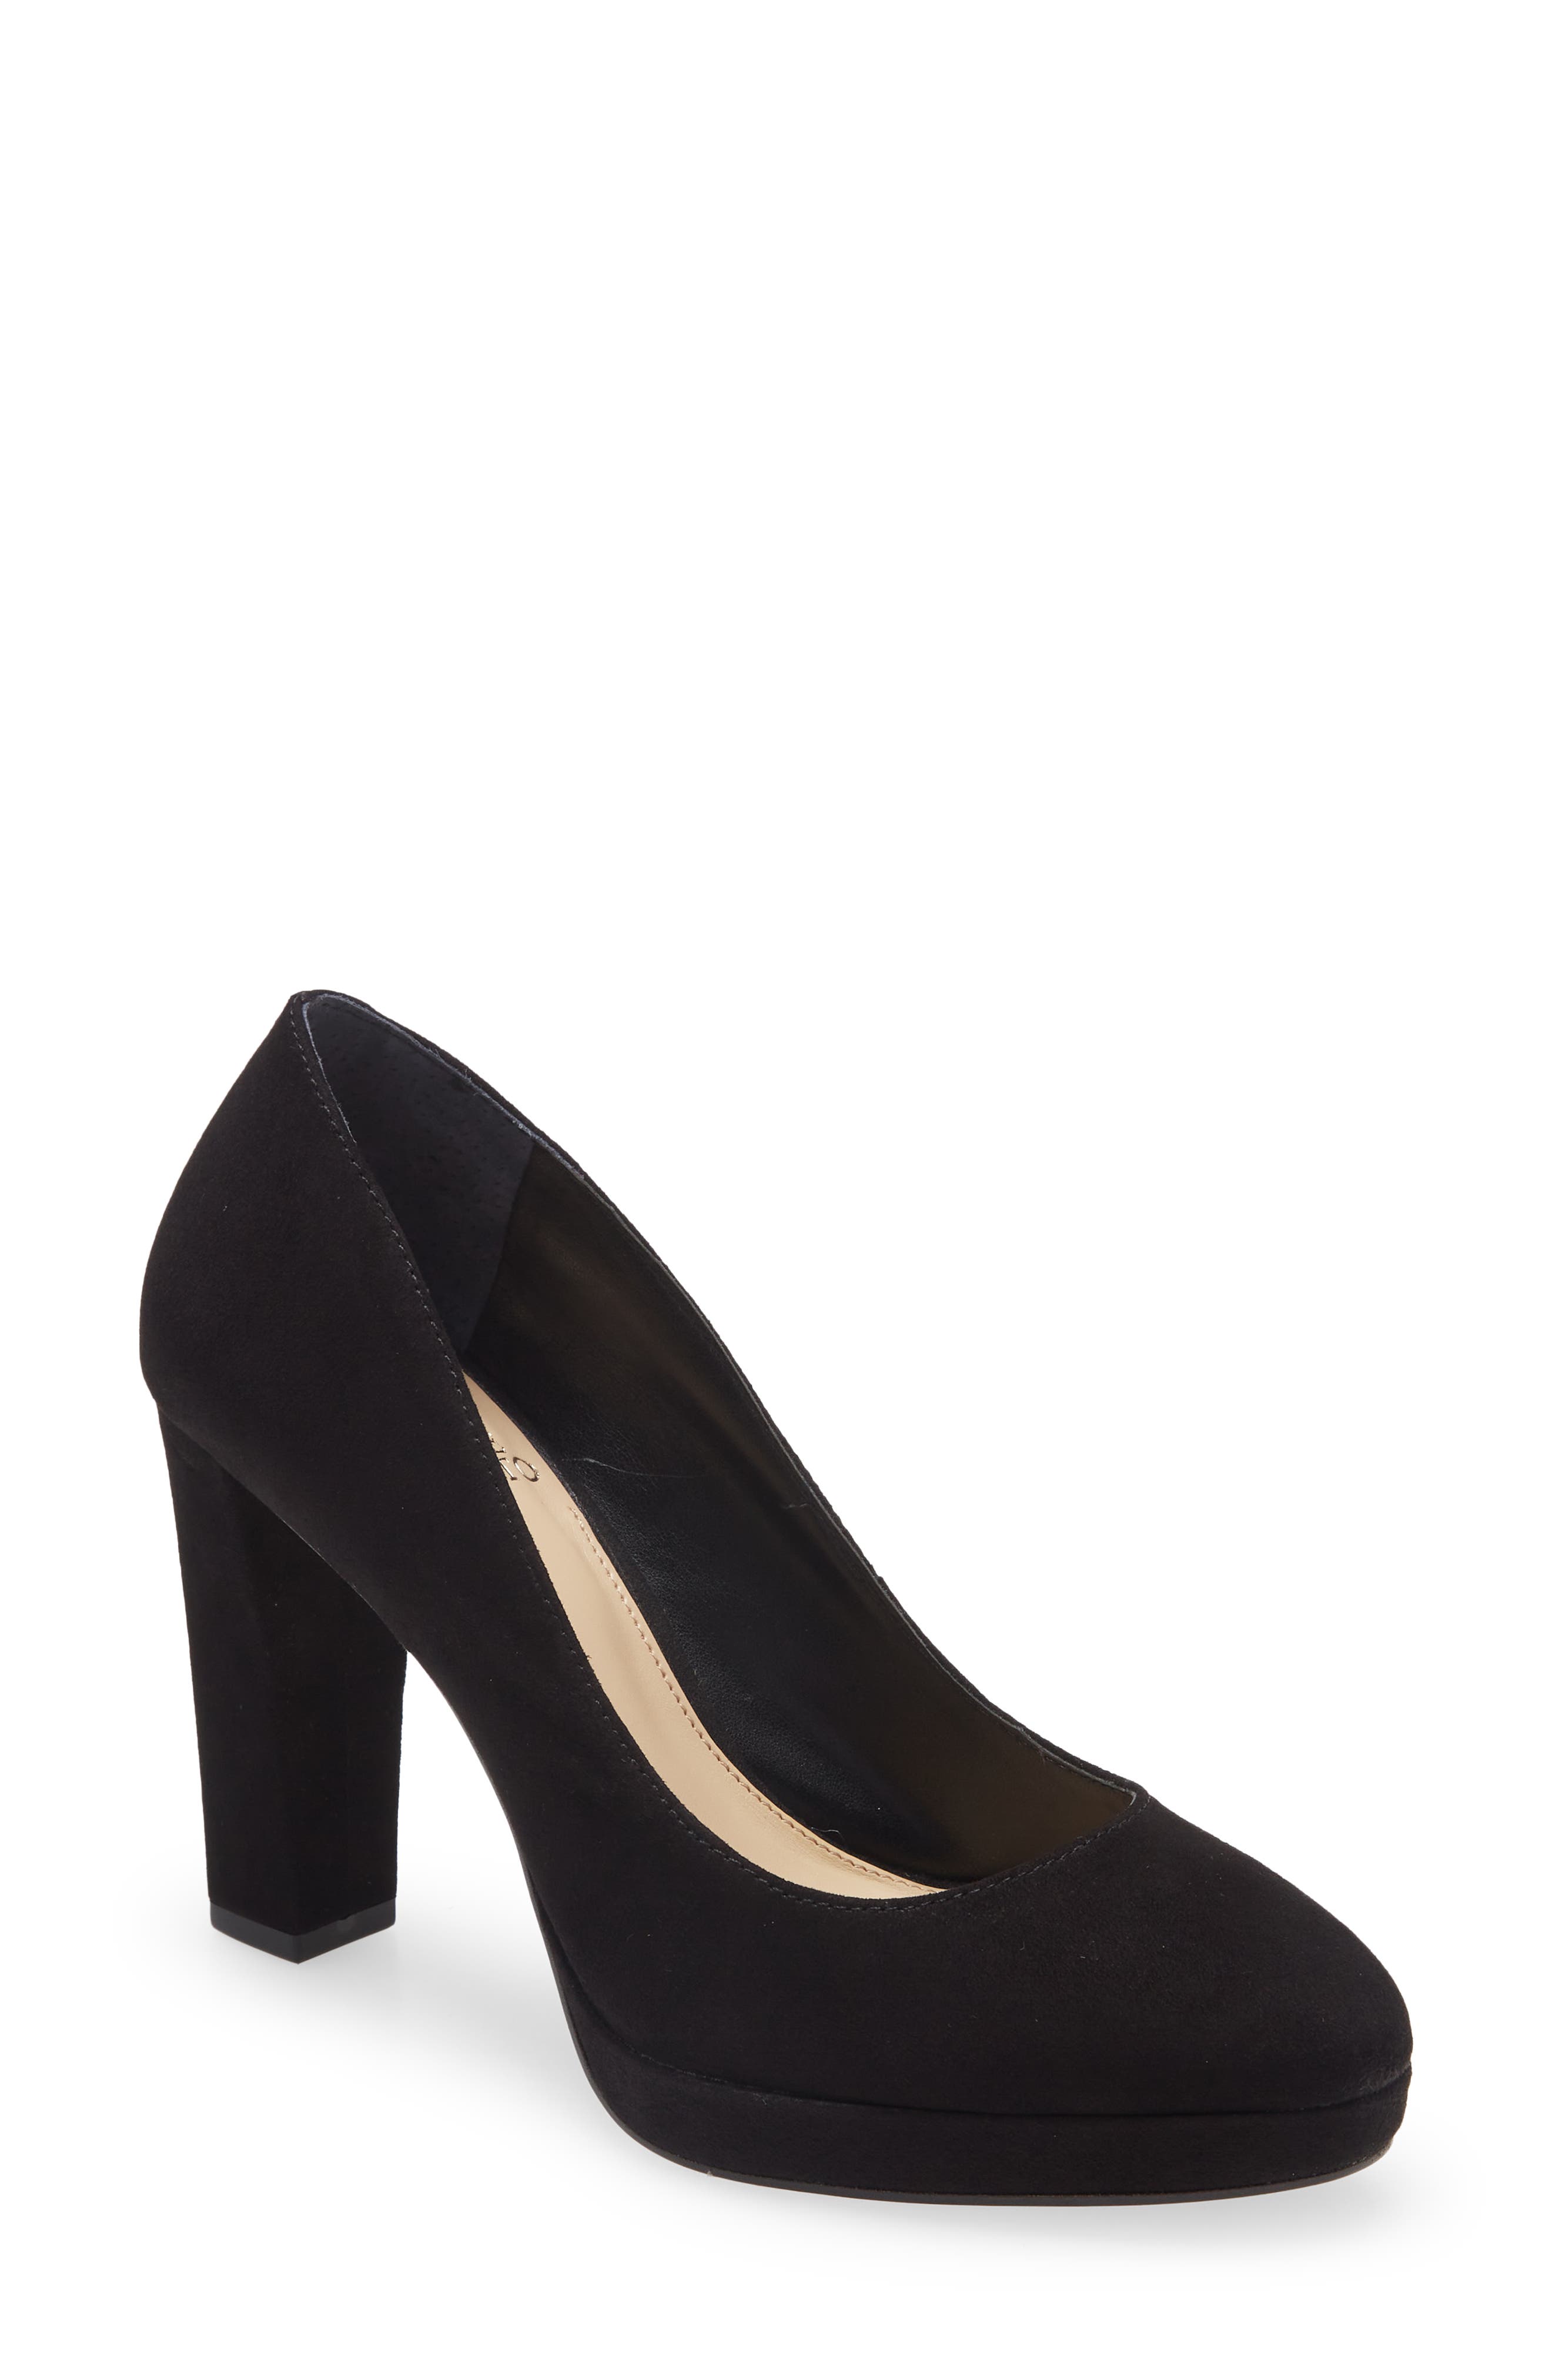 UPC 191707345508 product image for Vince Camuto Halria Pump in Black True Suede at Nordstrom, Size 6 | upcitemdb.com